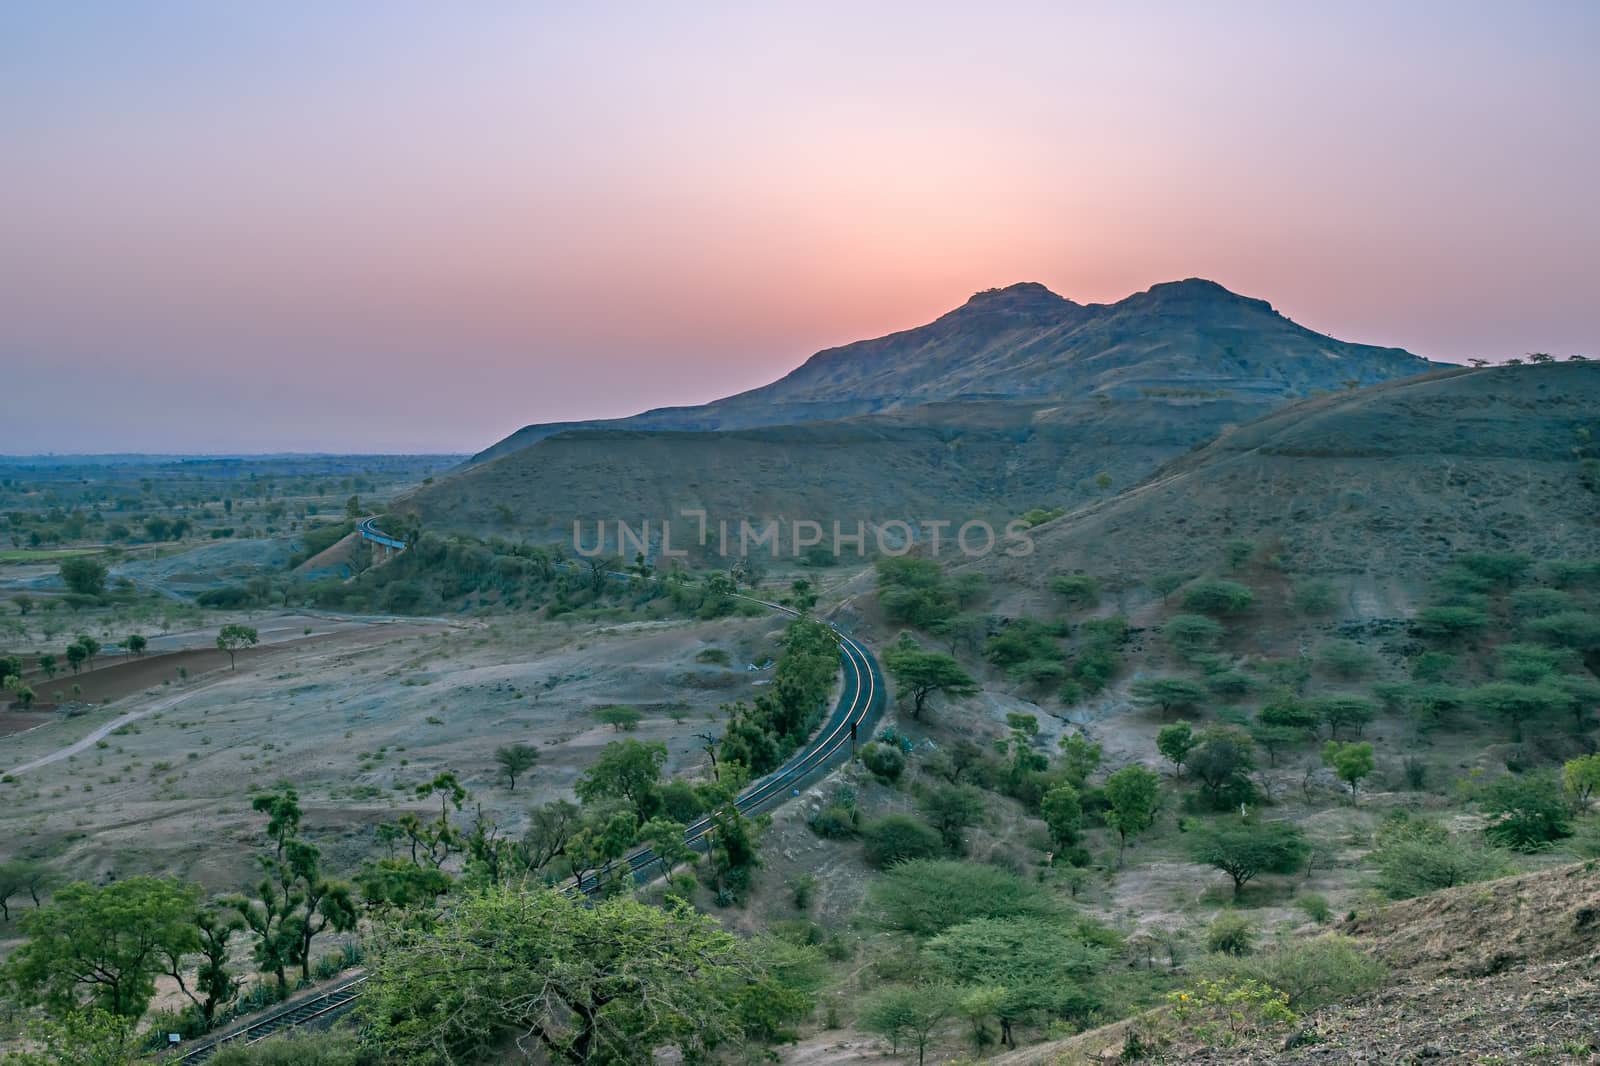 Rising Sun behind the hills along with a railway line in a village , outskirts of Pune, Maharashtra, India.